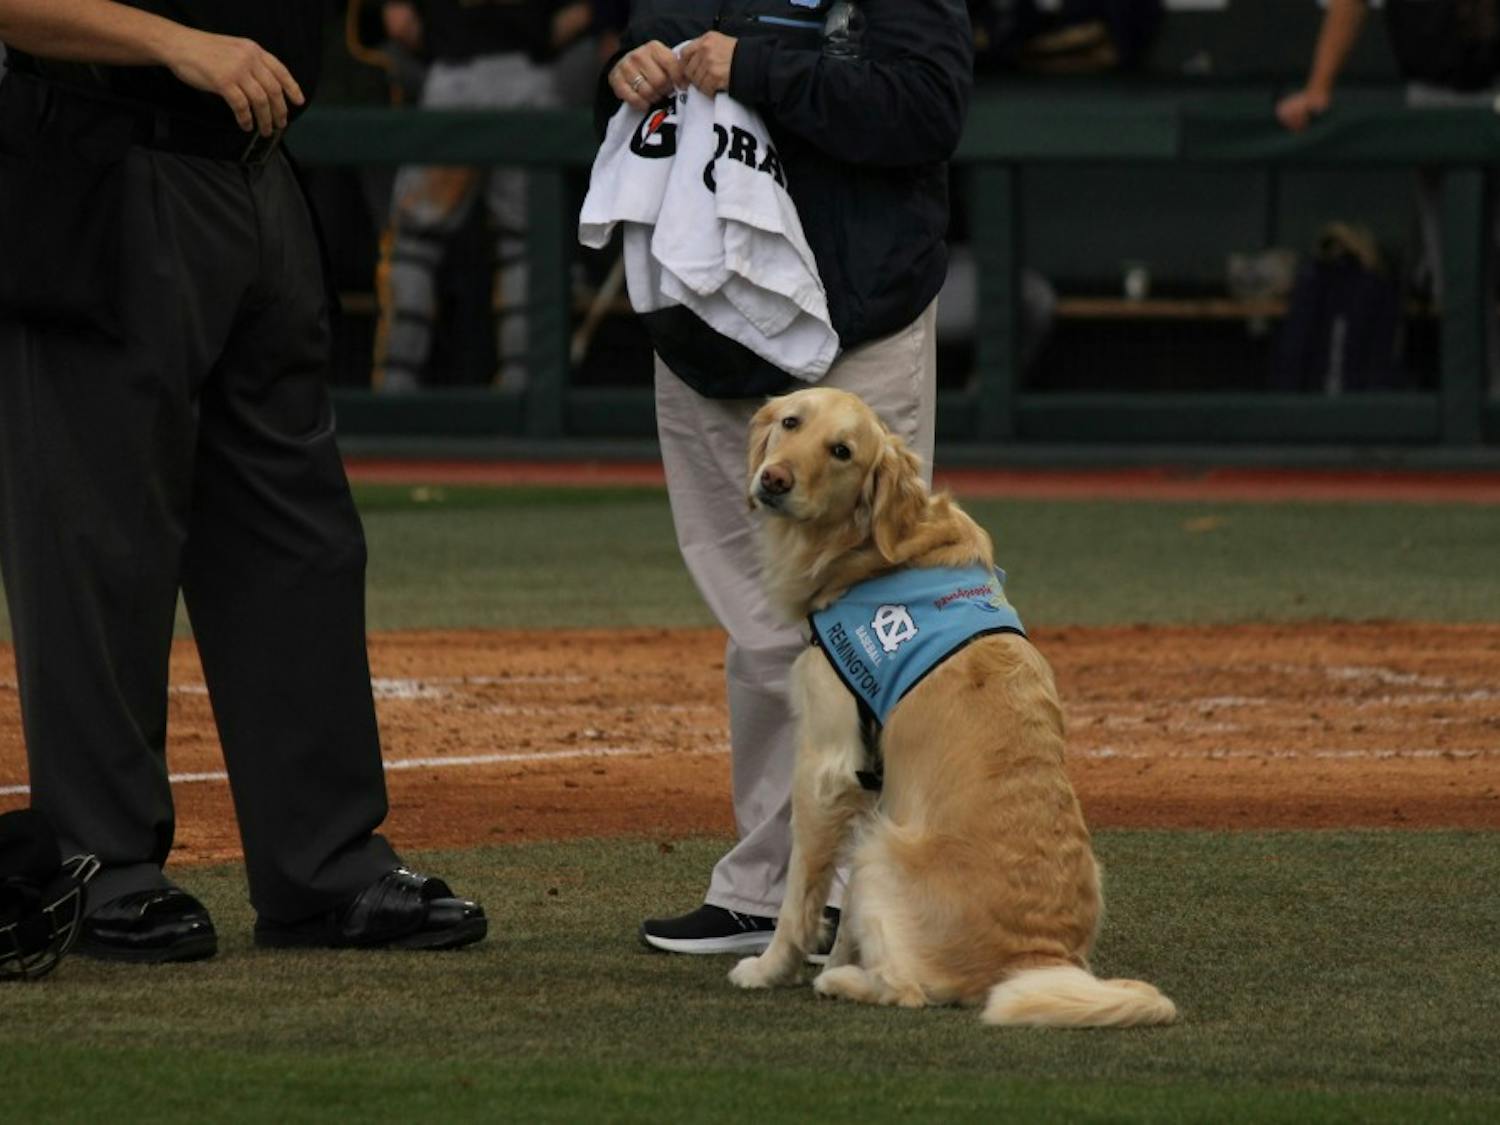 REMINGTON, UNC baseball's service dog, sits on the field during a Feb. 25 game against East Carolina.